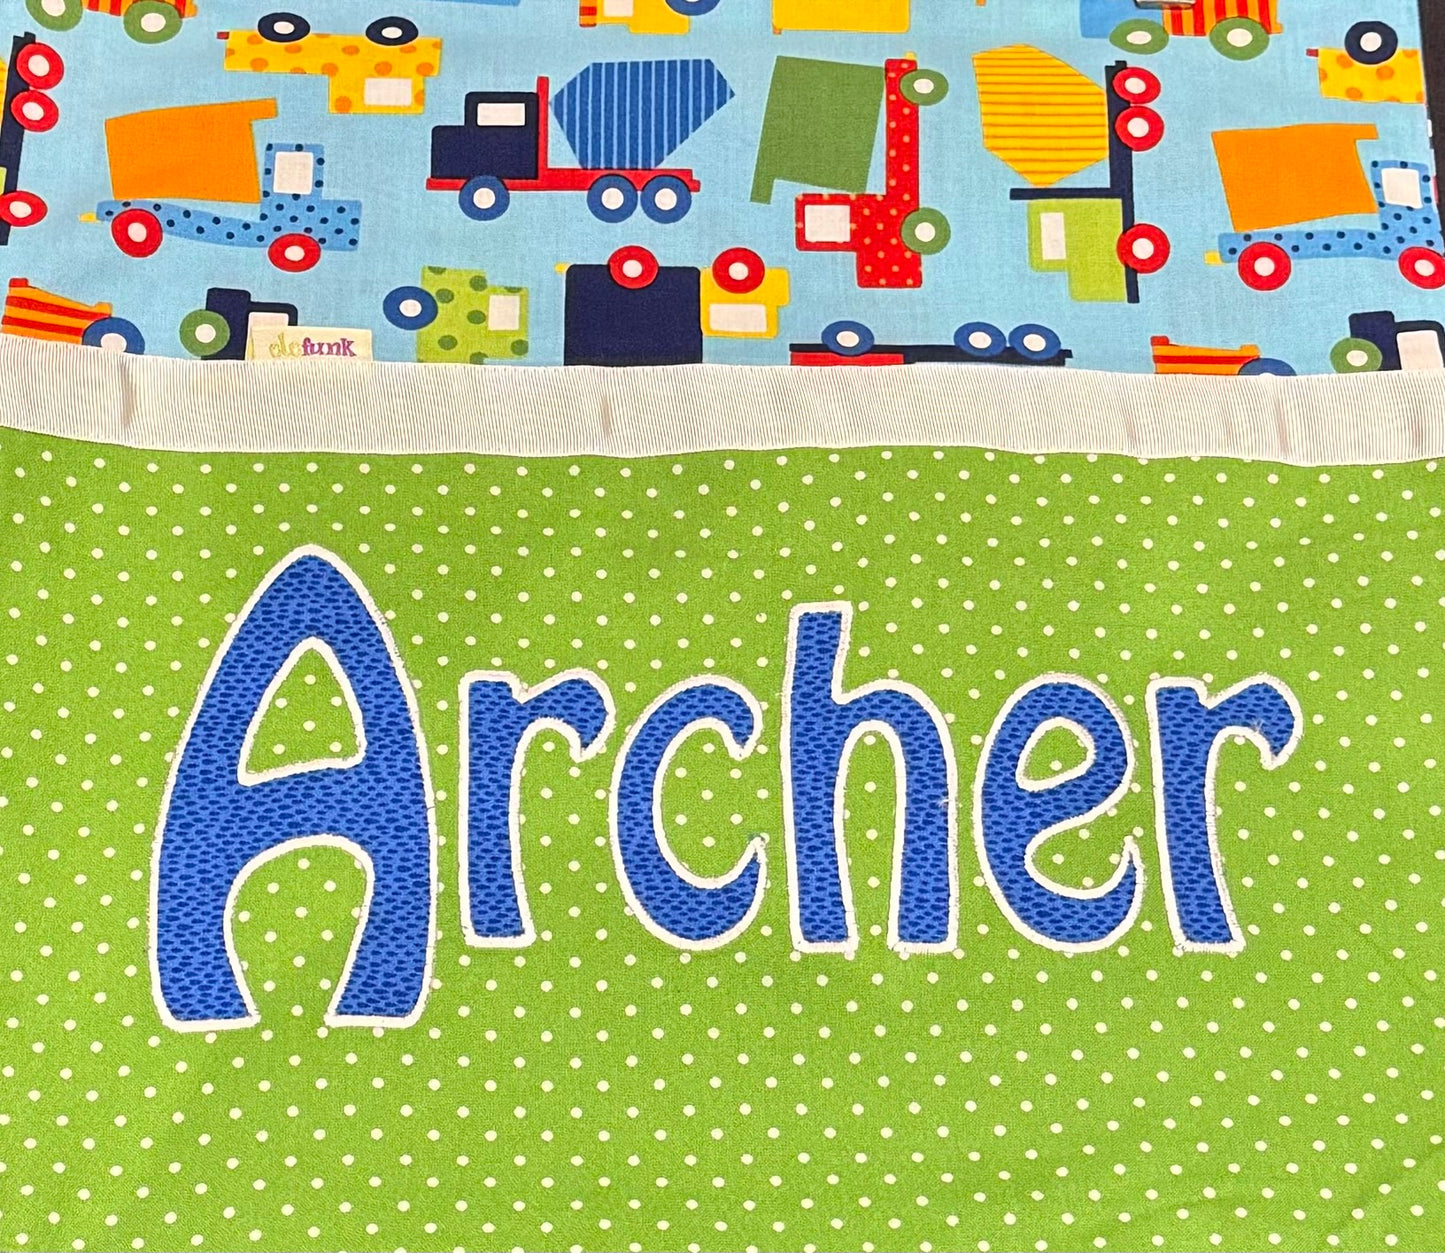 Archer Handmade Personalised Cushion Cover